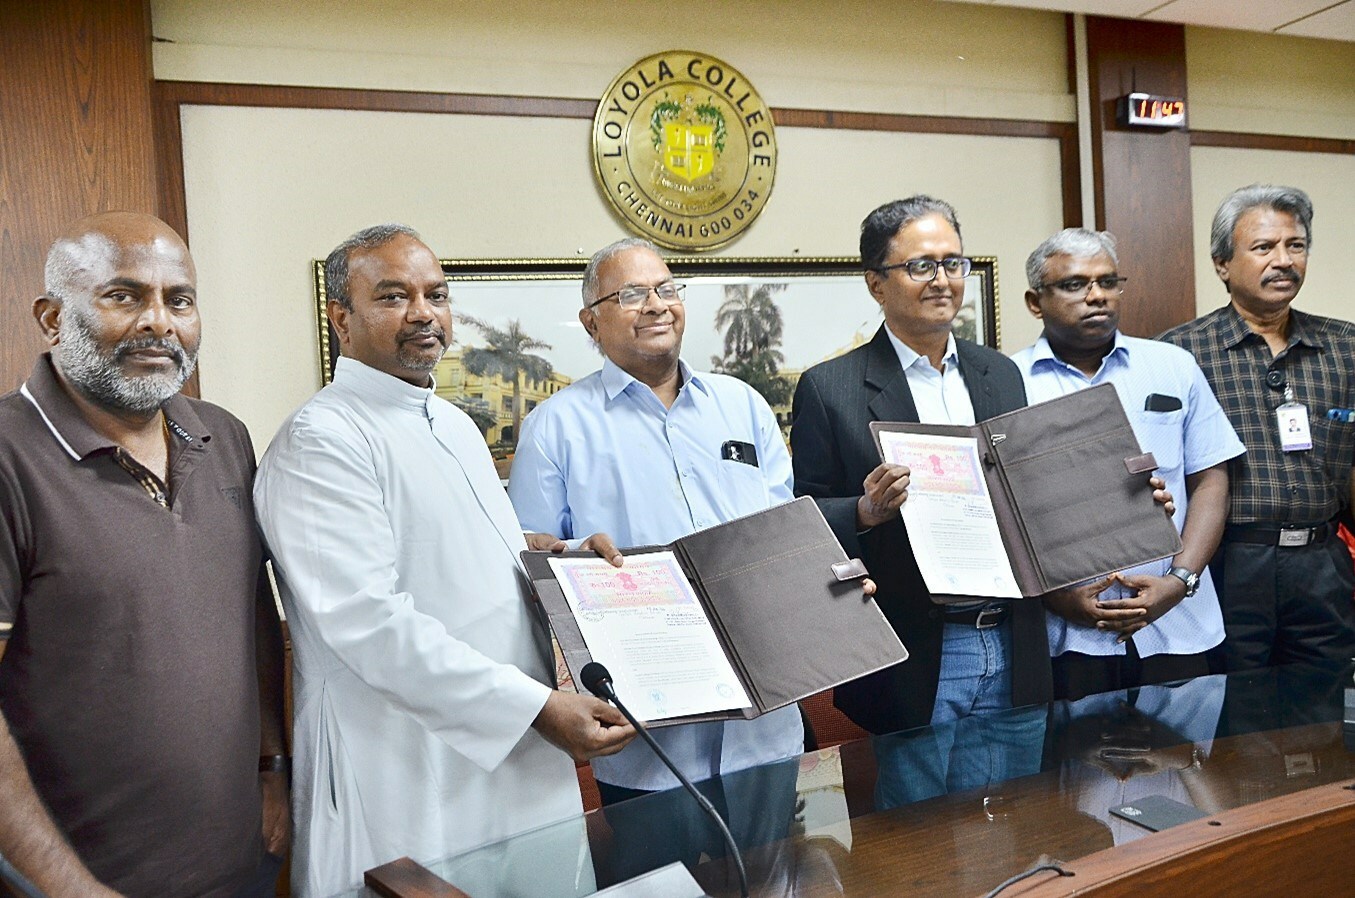 Movate Signs MoU with Loyola College to set up an AI & IoT-based Robotics Lab in India